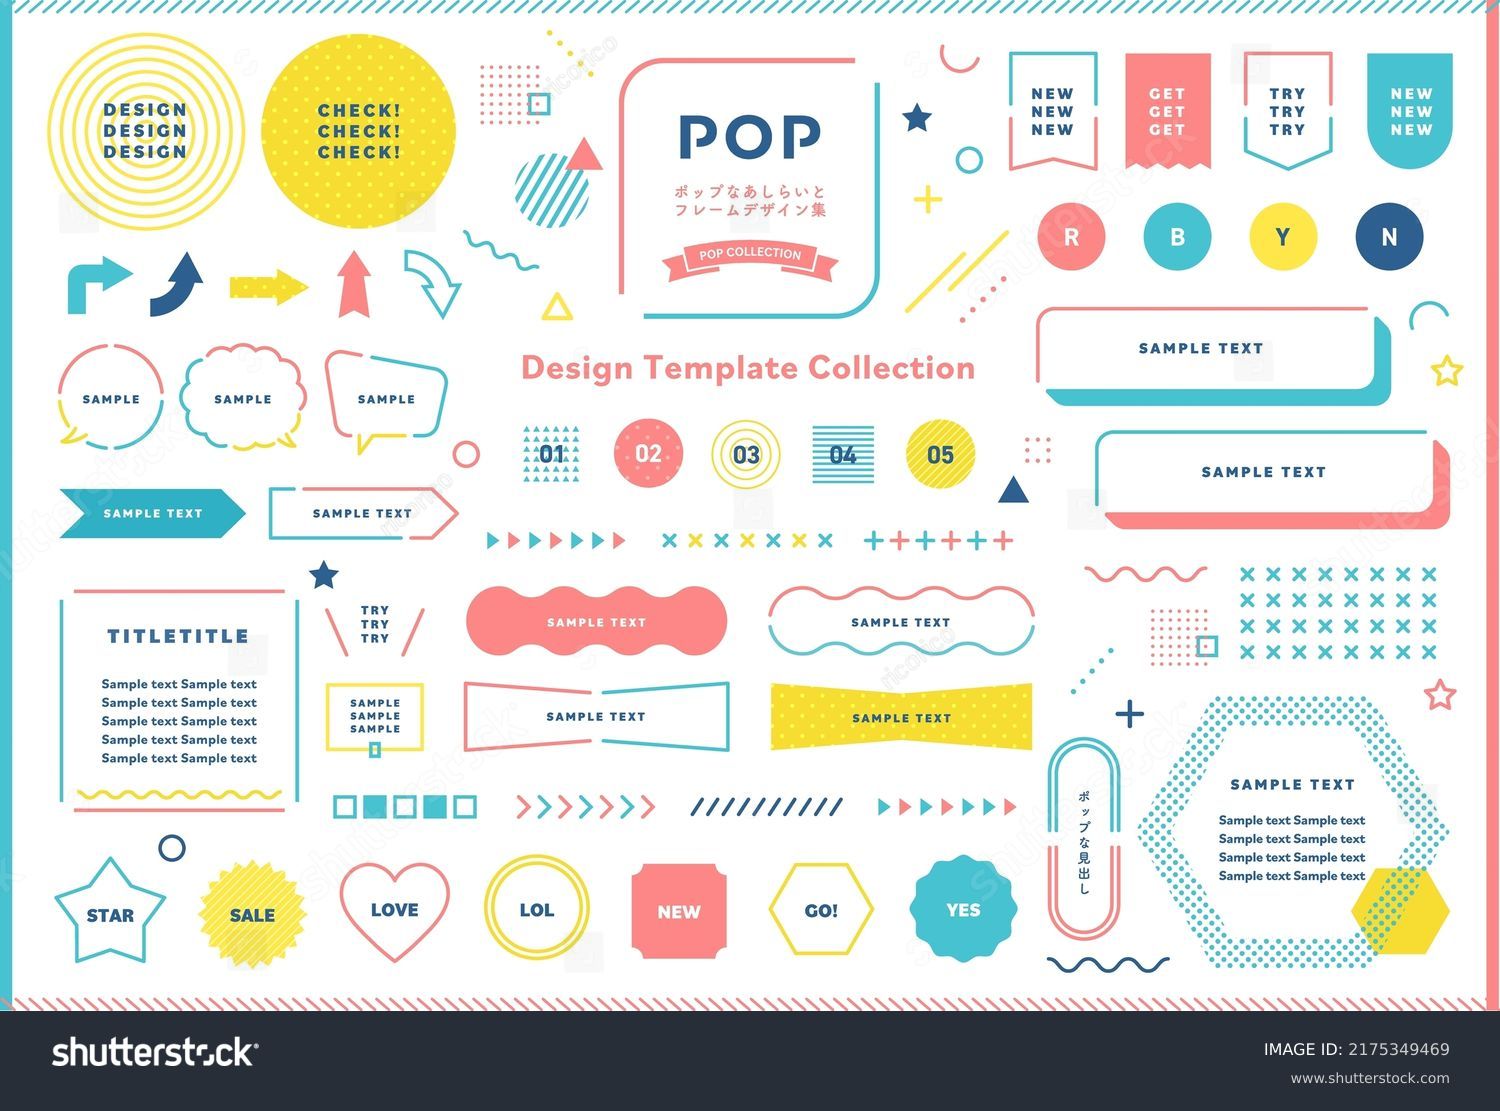 Retro-pop geometrical pattern and frame design set. Open path available. Editable. Illustrations, vectors, ribbons, banners, templates #2175349469